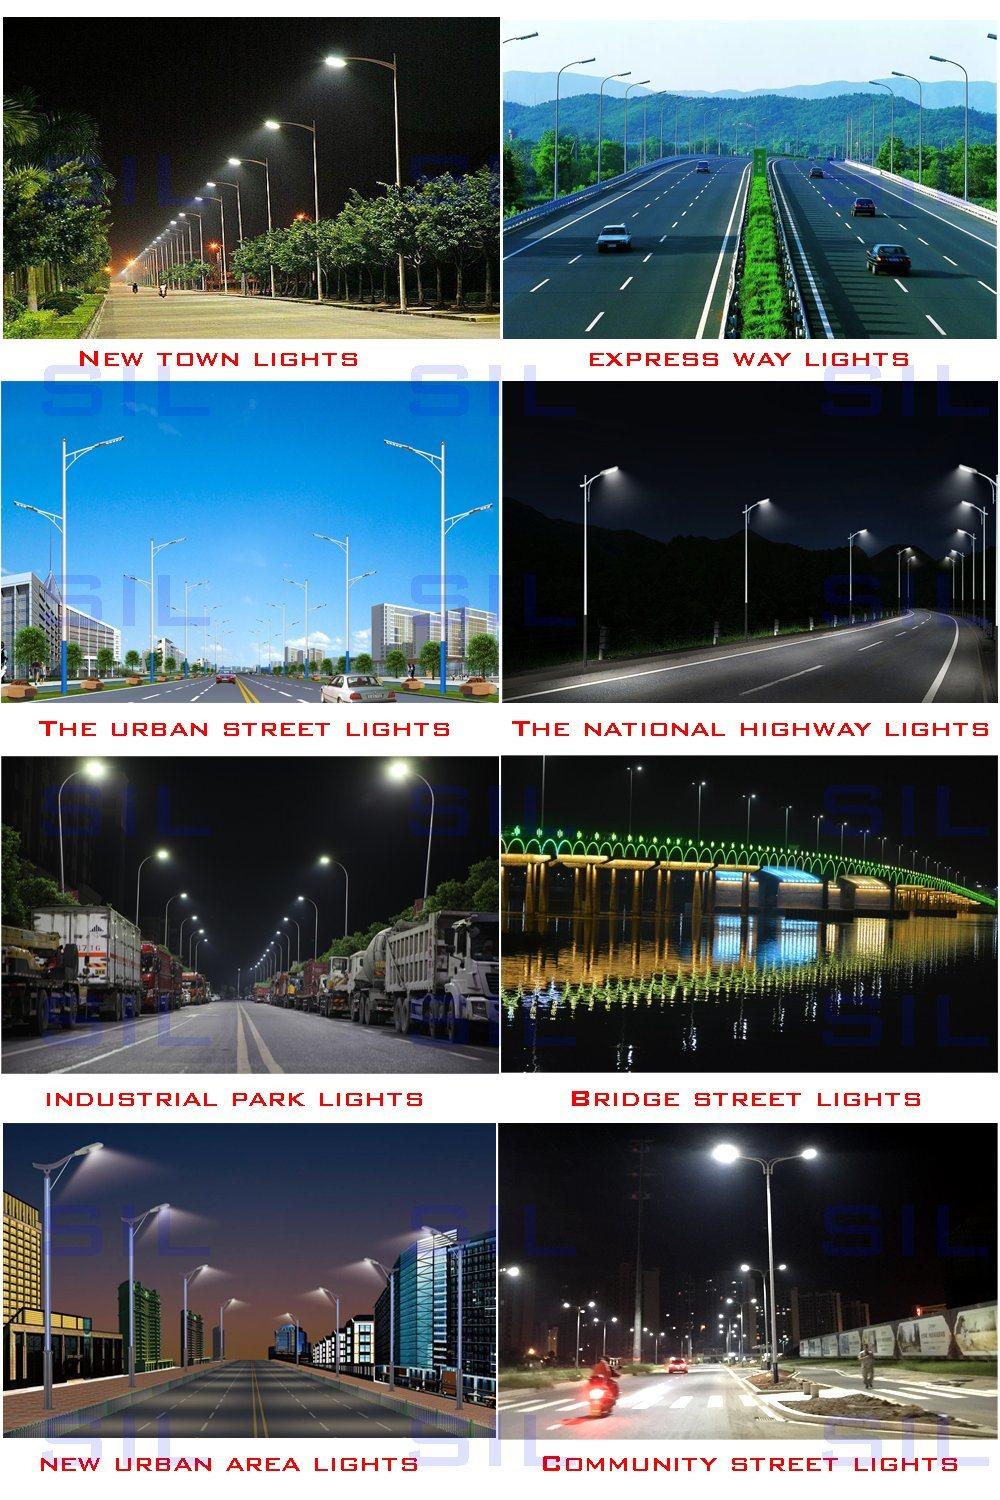 High Quality Outdoor Road Lighting Waterproof Ultra-Thin 400W LED Street Lamp